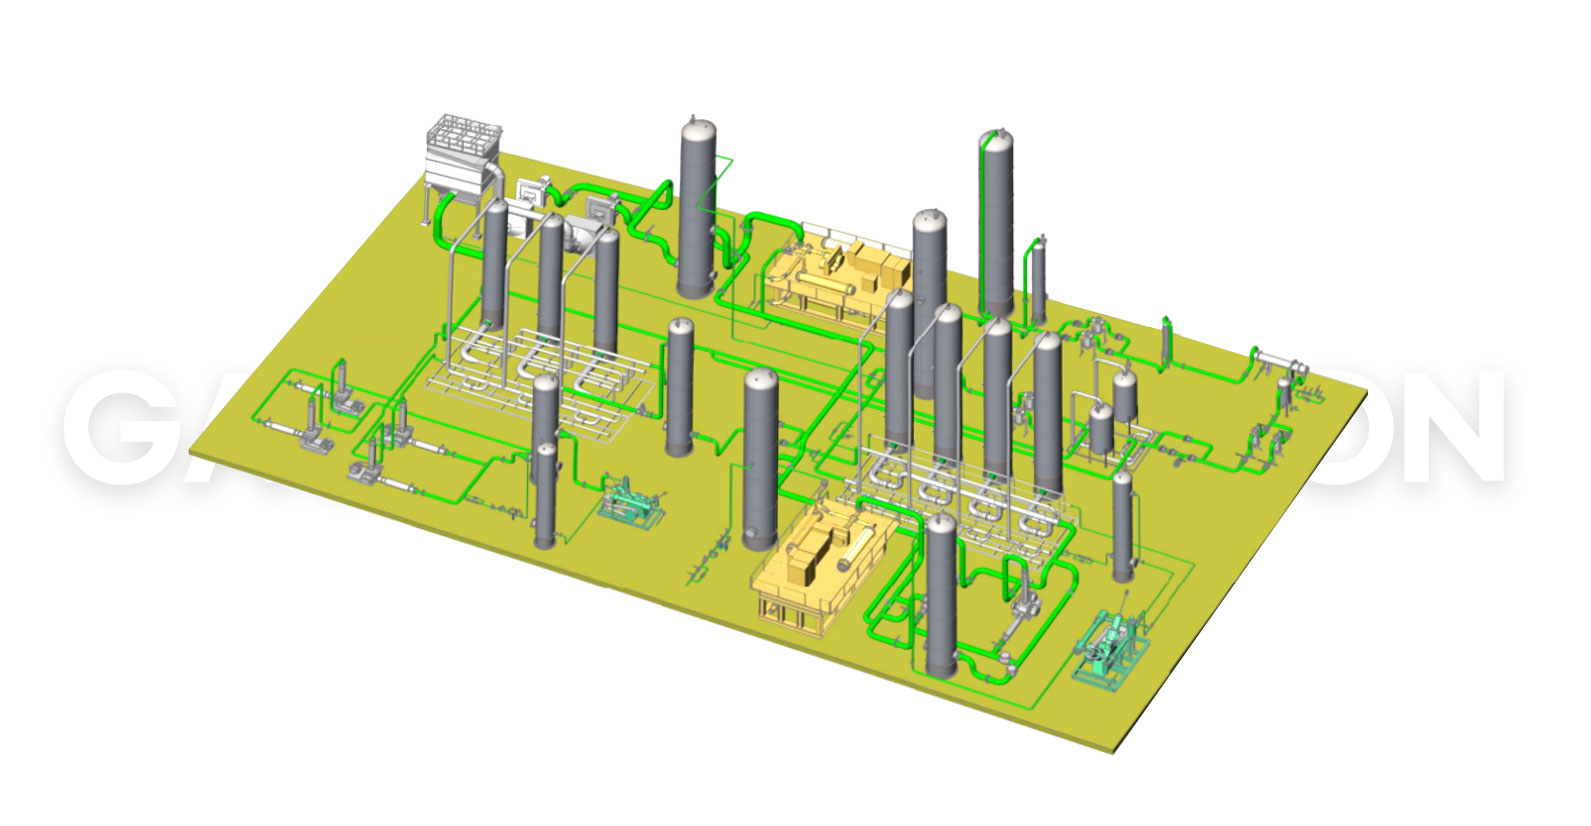 Aspe offers effective CO2 recovery solutions through its expertise in hydrogen plant, and Pressure Swing Adsorption.